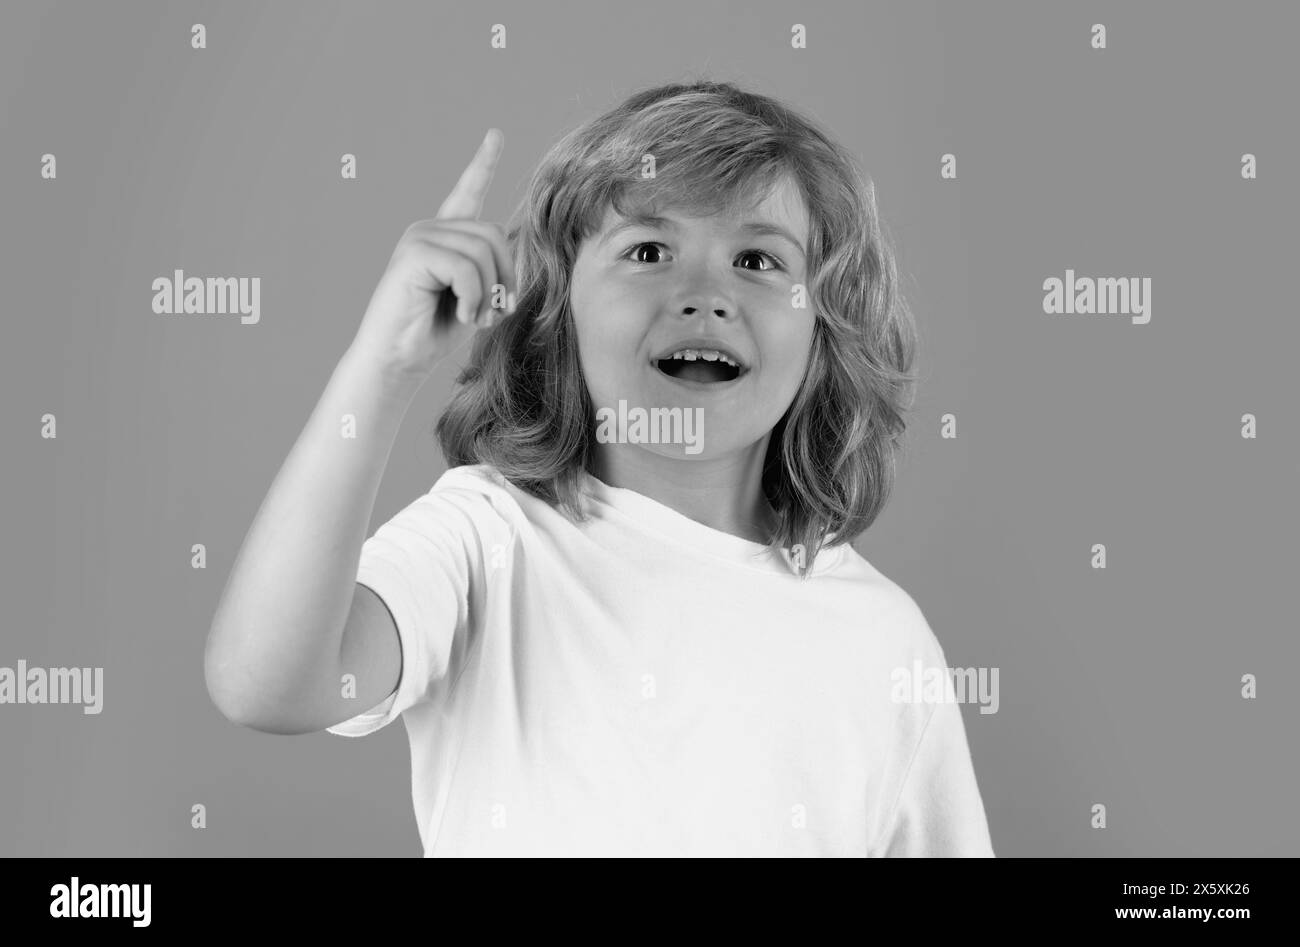 Funny kid boy have idea on studio isolated background. Surprised face, amazed emotions of child. Portrait of school boy with finger pointed up. Stock Photo